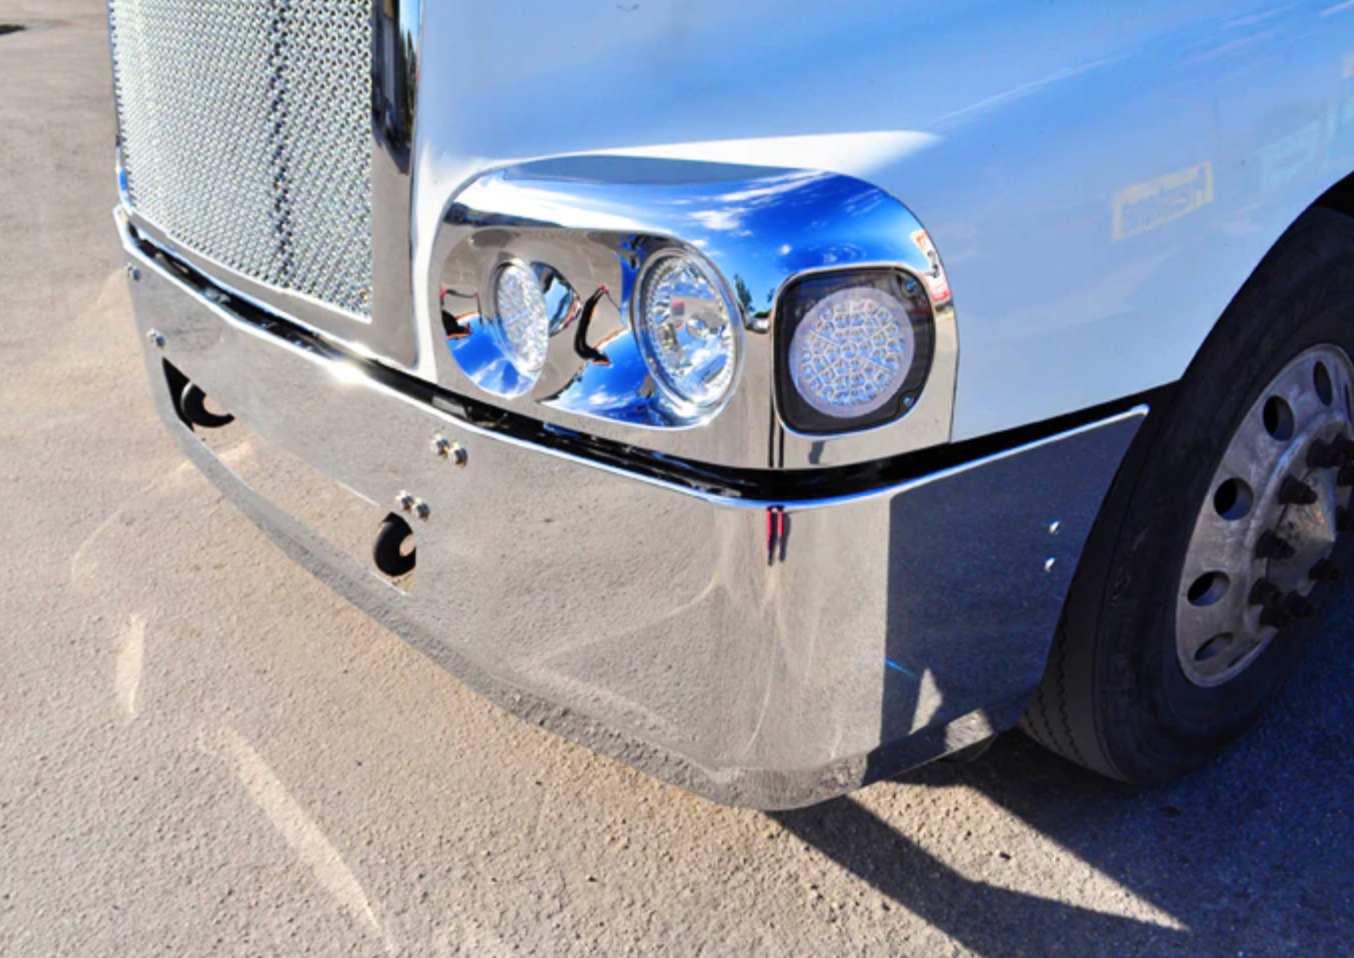 Bumper 18" Chrome Freightliner Century (1996-2004) . Aerodynamic Cut, Mounting Bolt & Large Center Tow Holes.